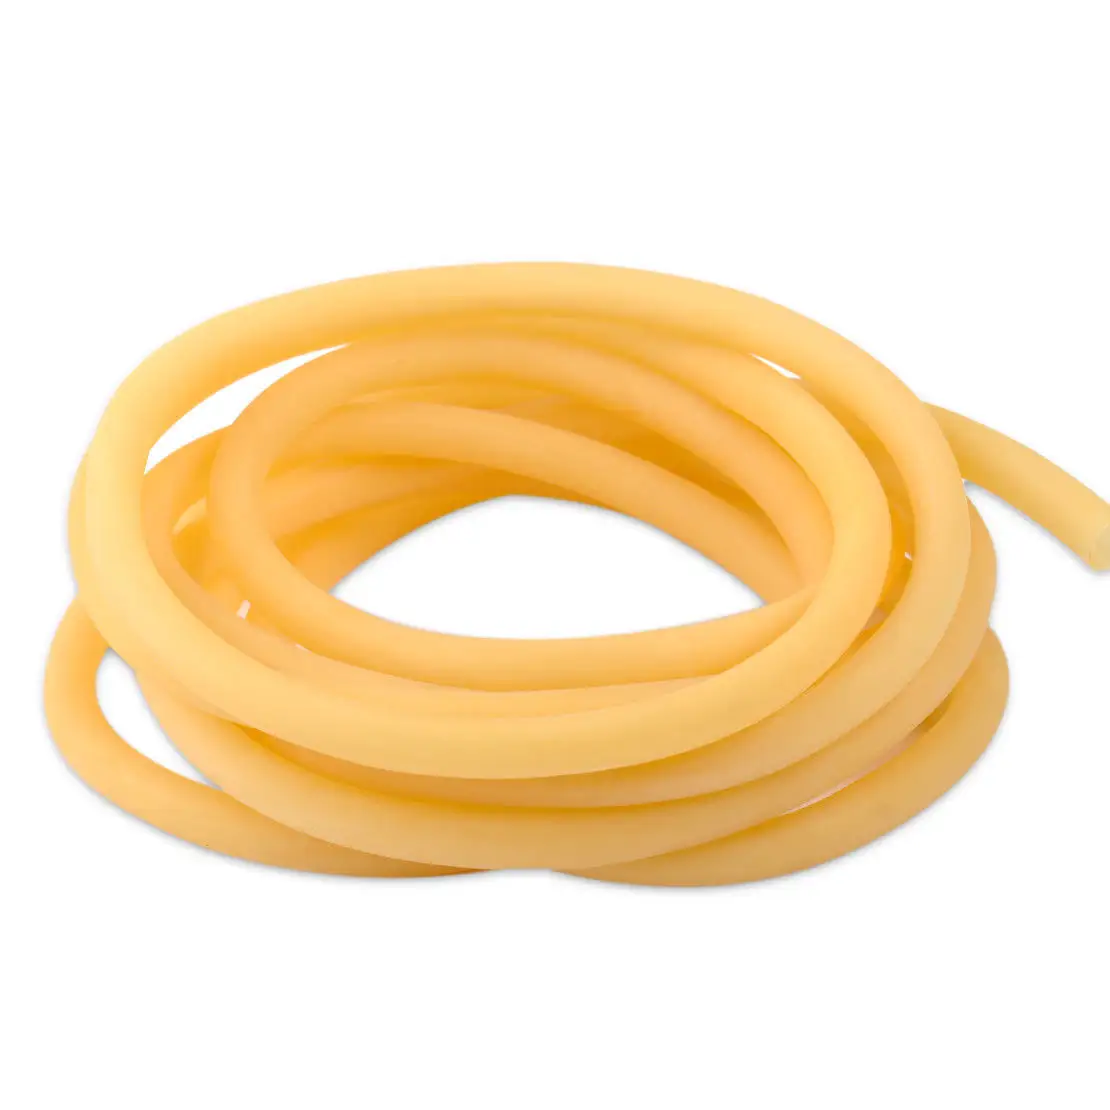 3M 6Mm X 9Mm Latex Rubber Tube Surgical Medical Tube Hose Natural Slingshot for Hunting Slingshot Fitness Yoga Bow Accessories